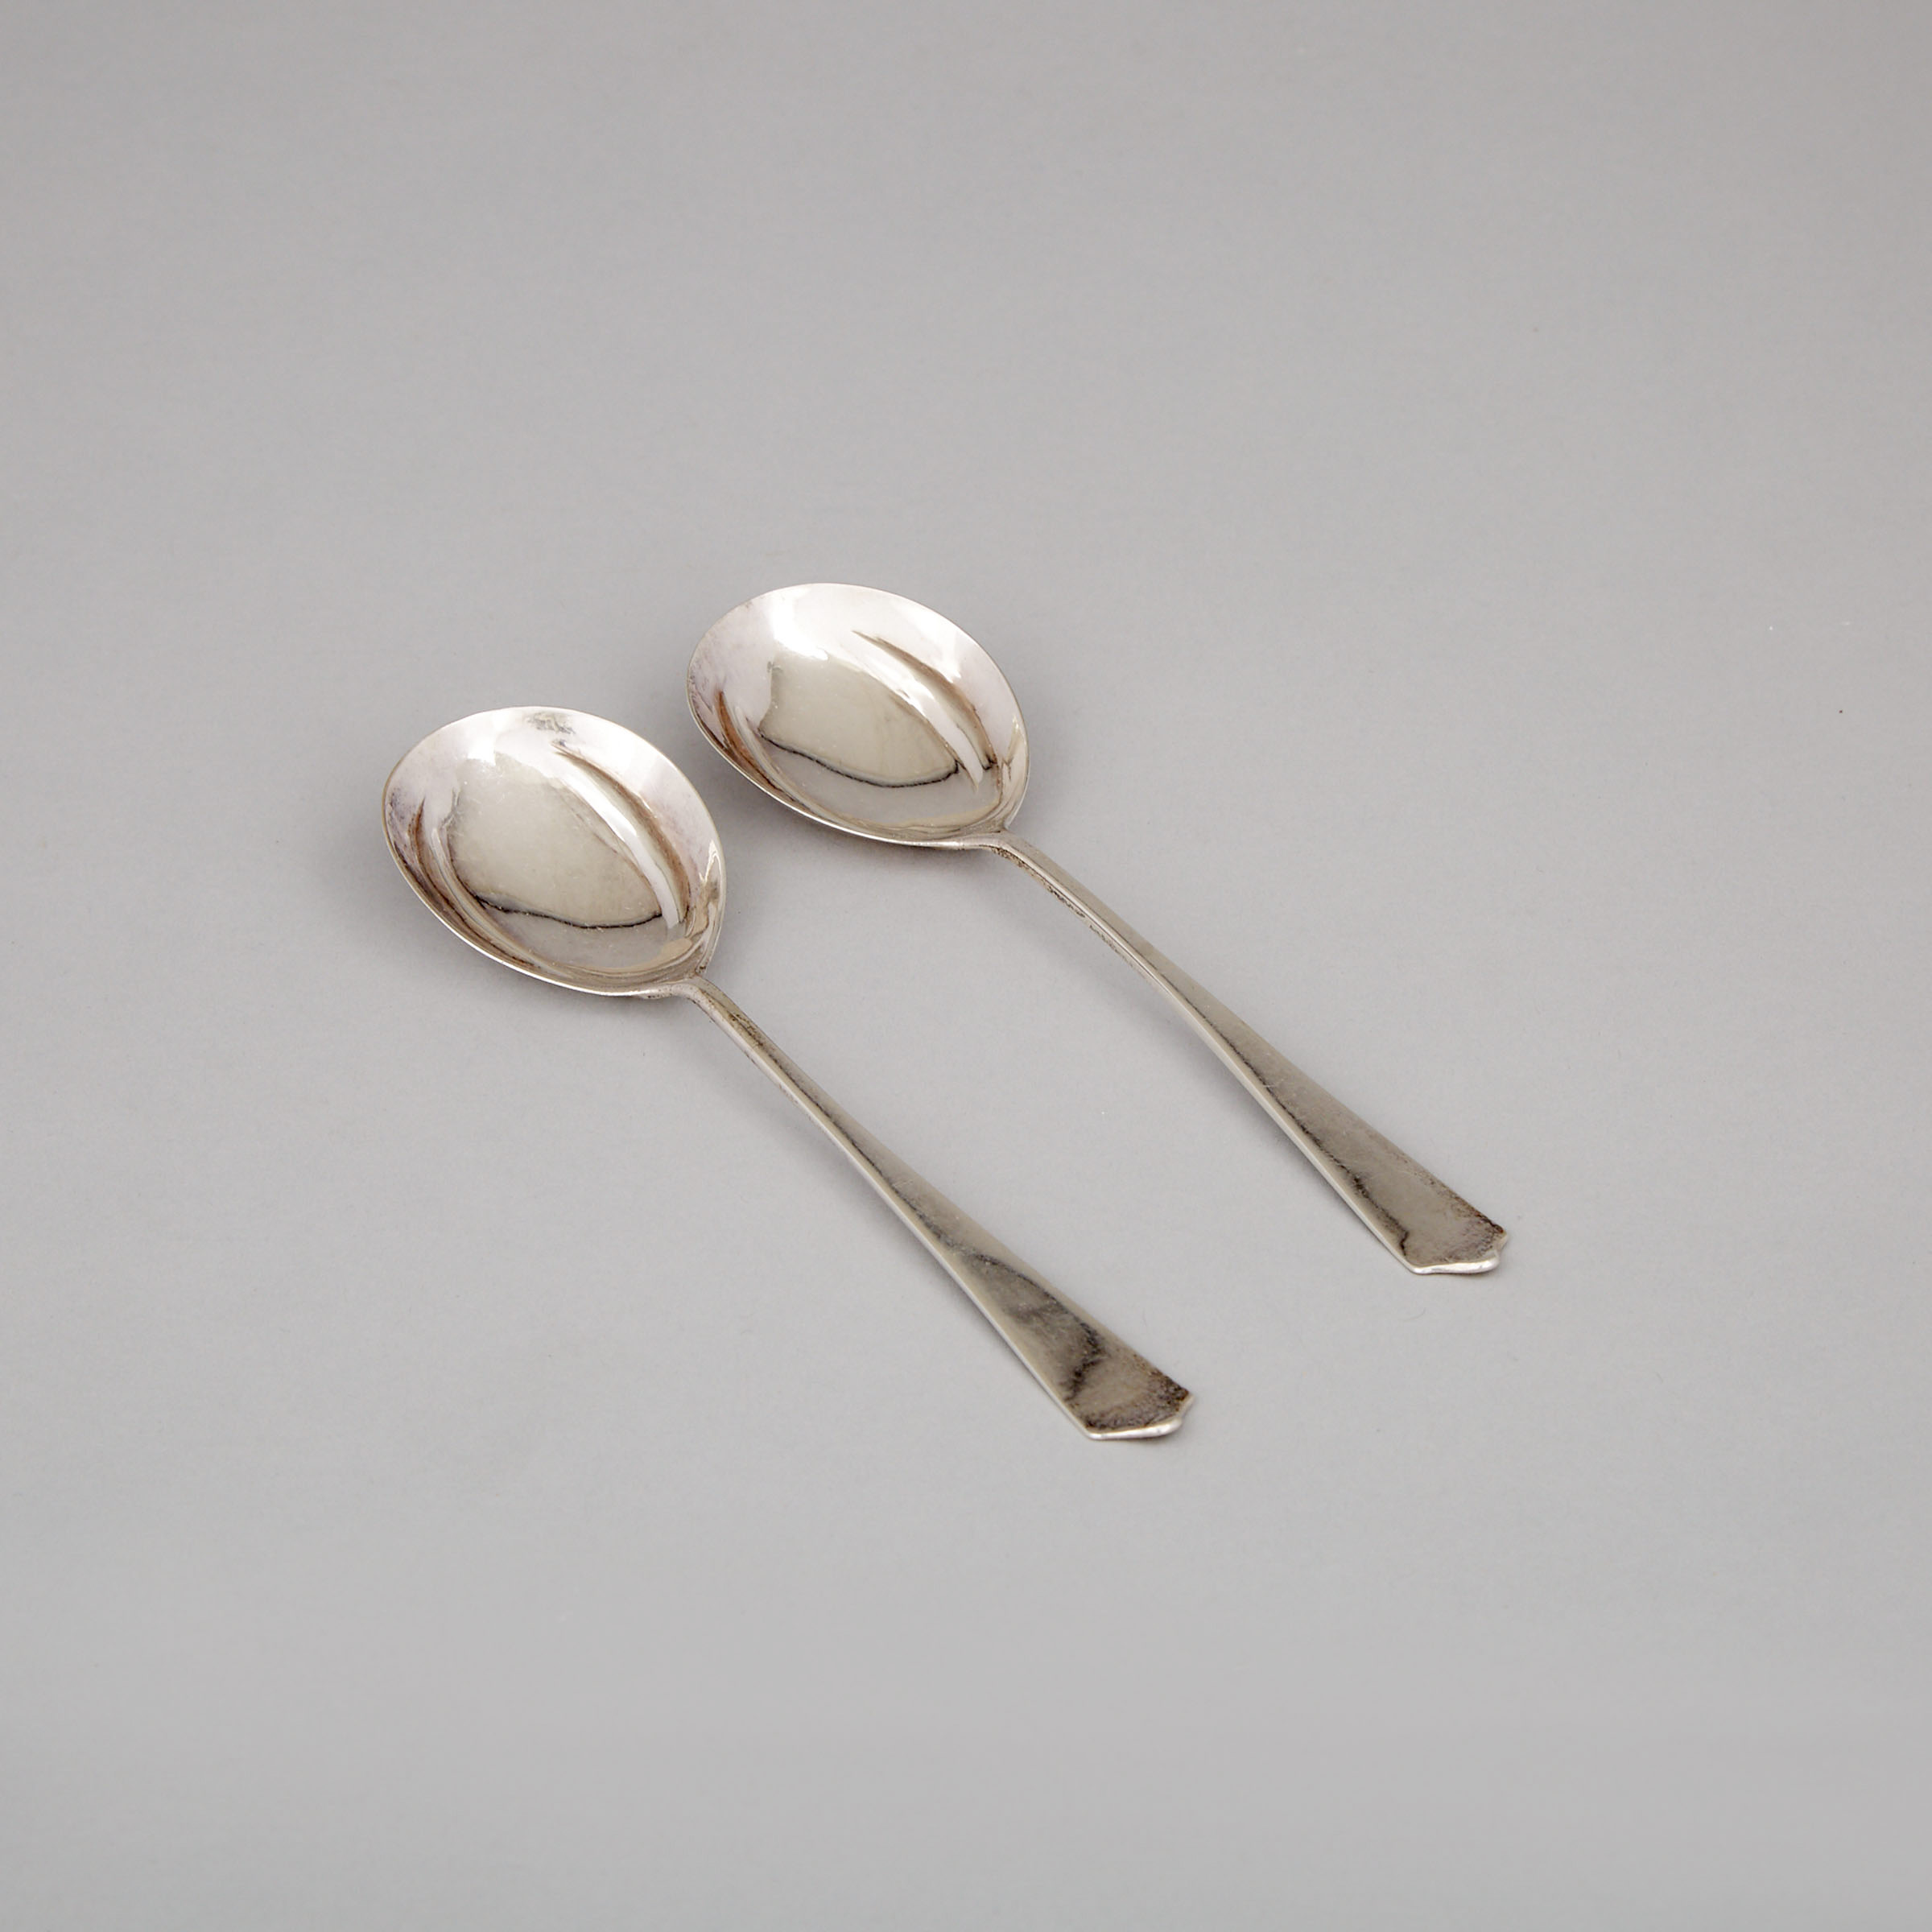 Pair of Scottish Provincial Silver Berry Spoons, Jameson & Naughton, Inverness, 19th century